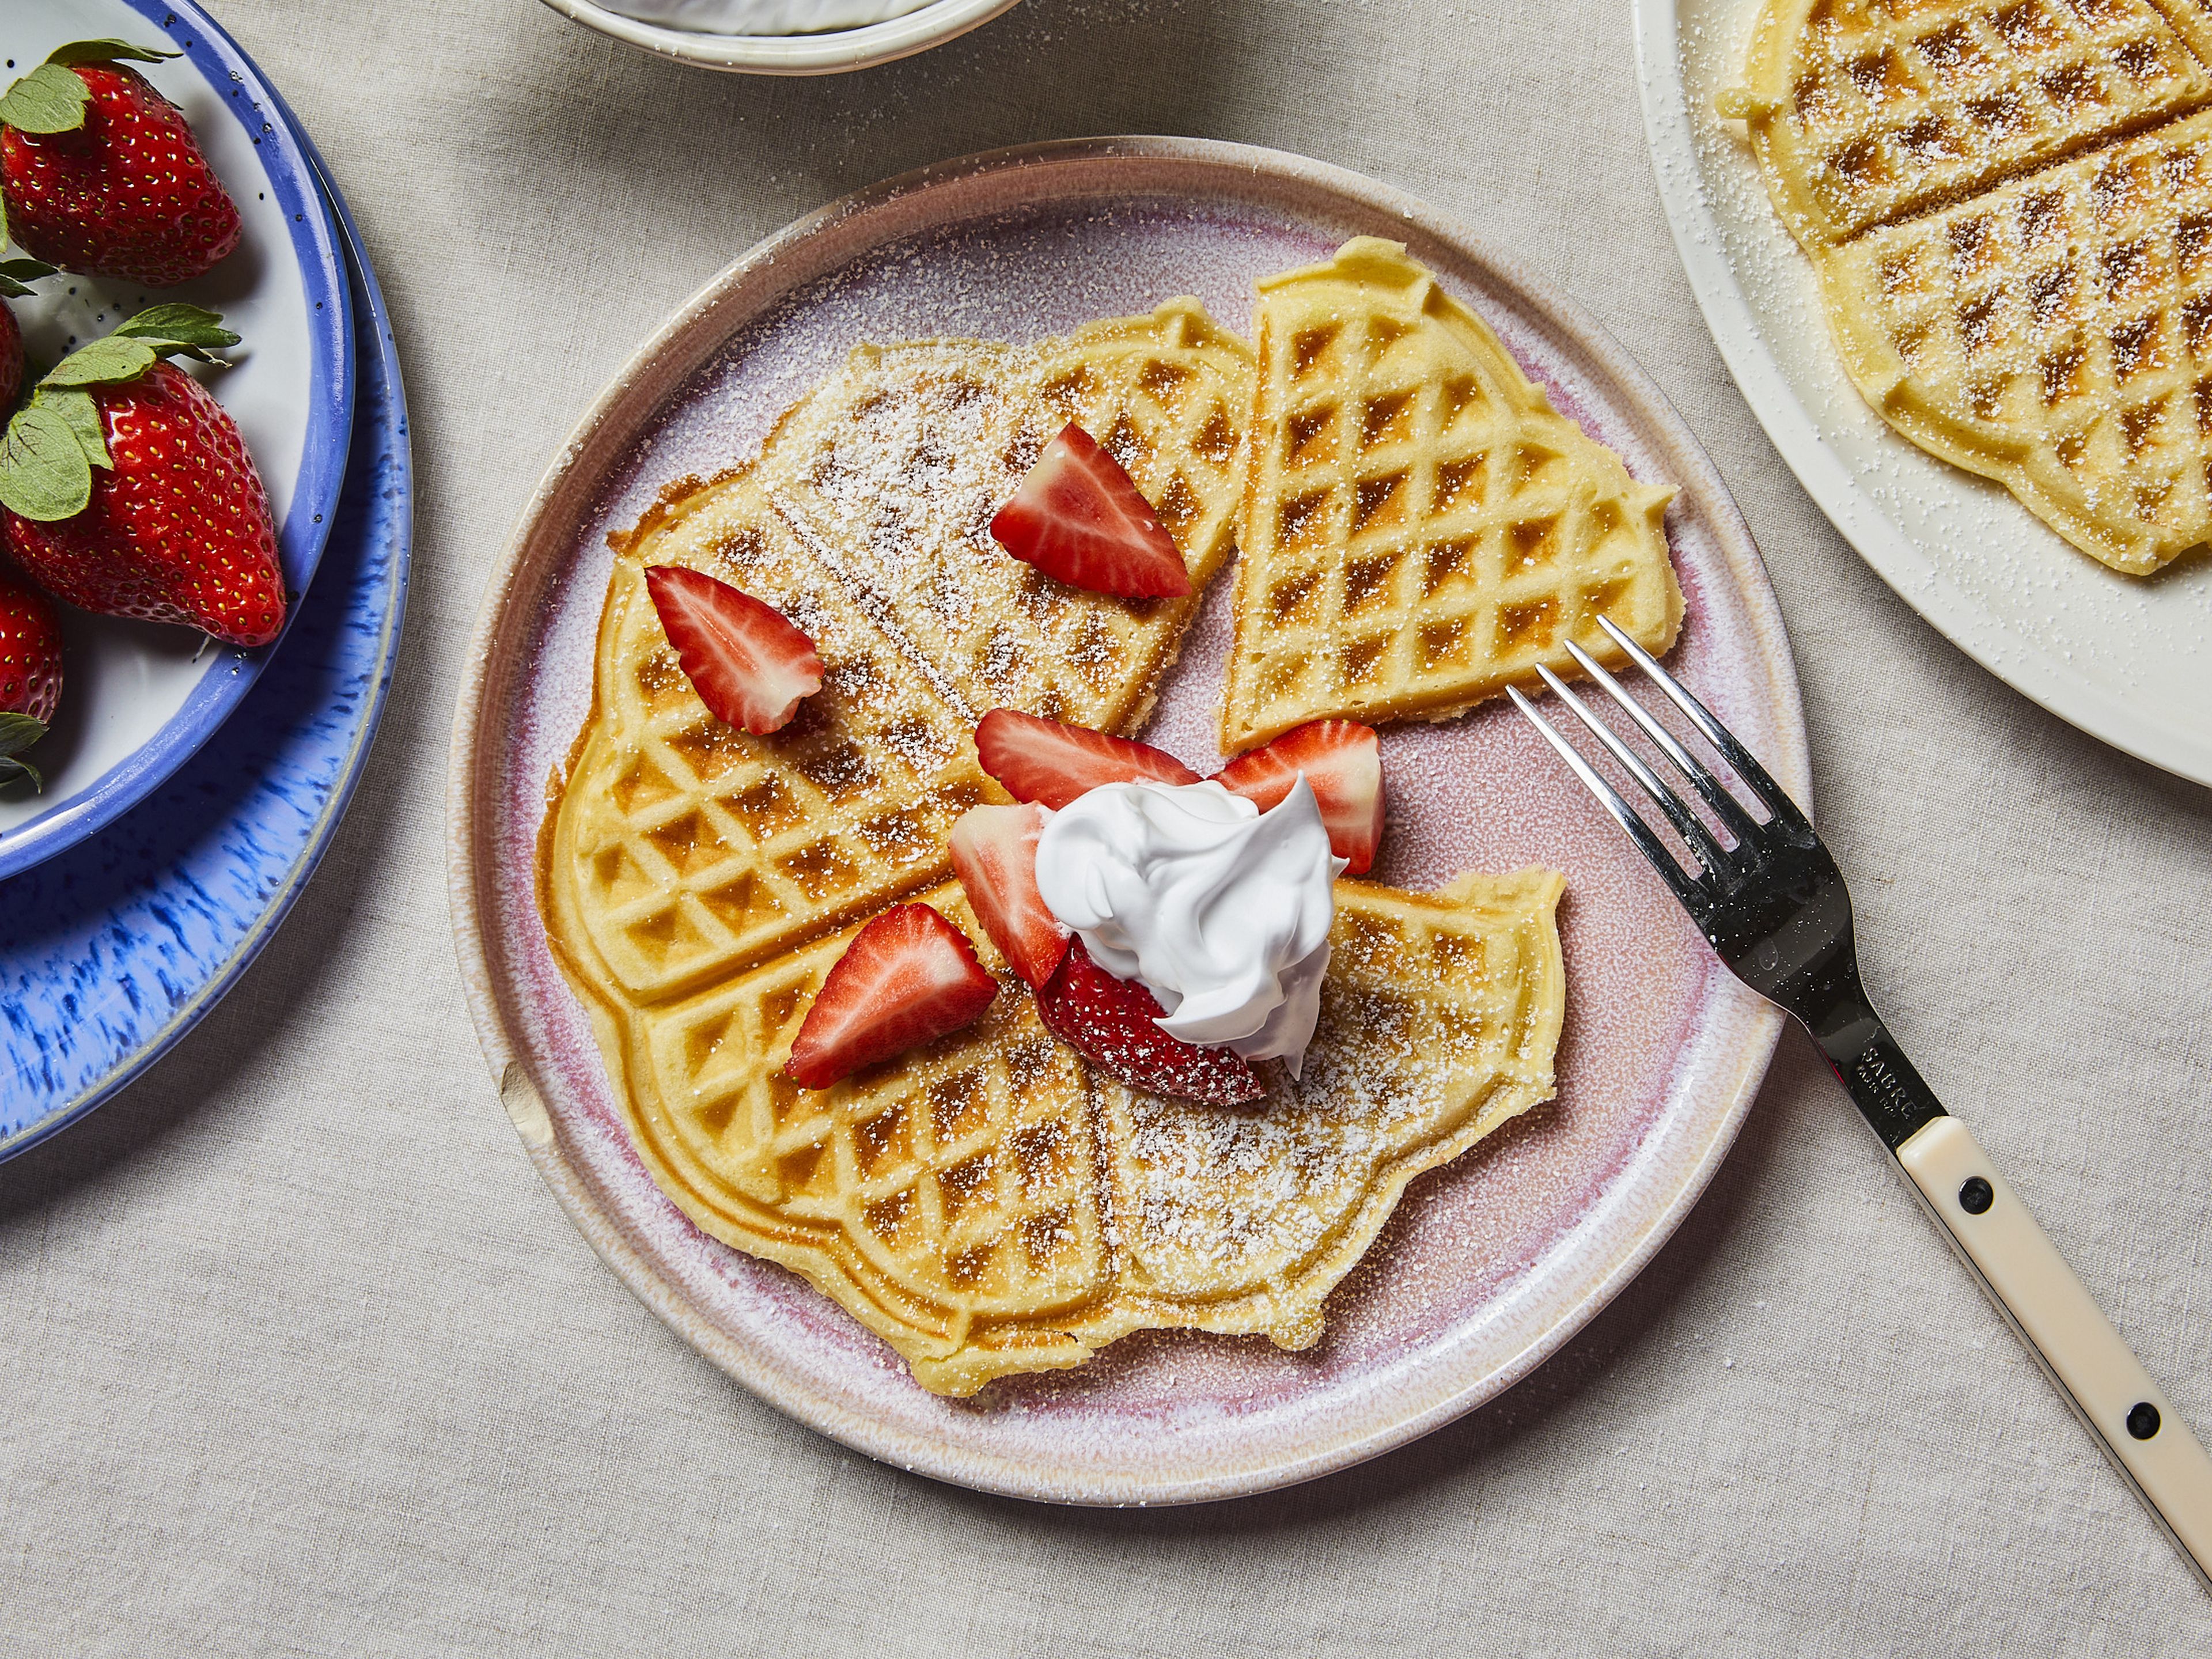 The lightest and crispiest homemade waffles